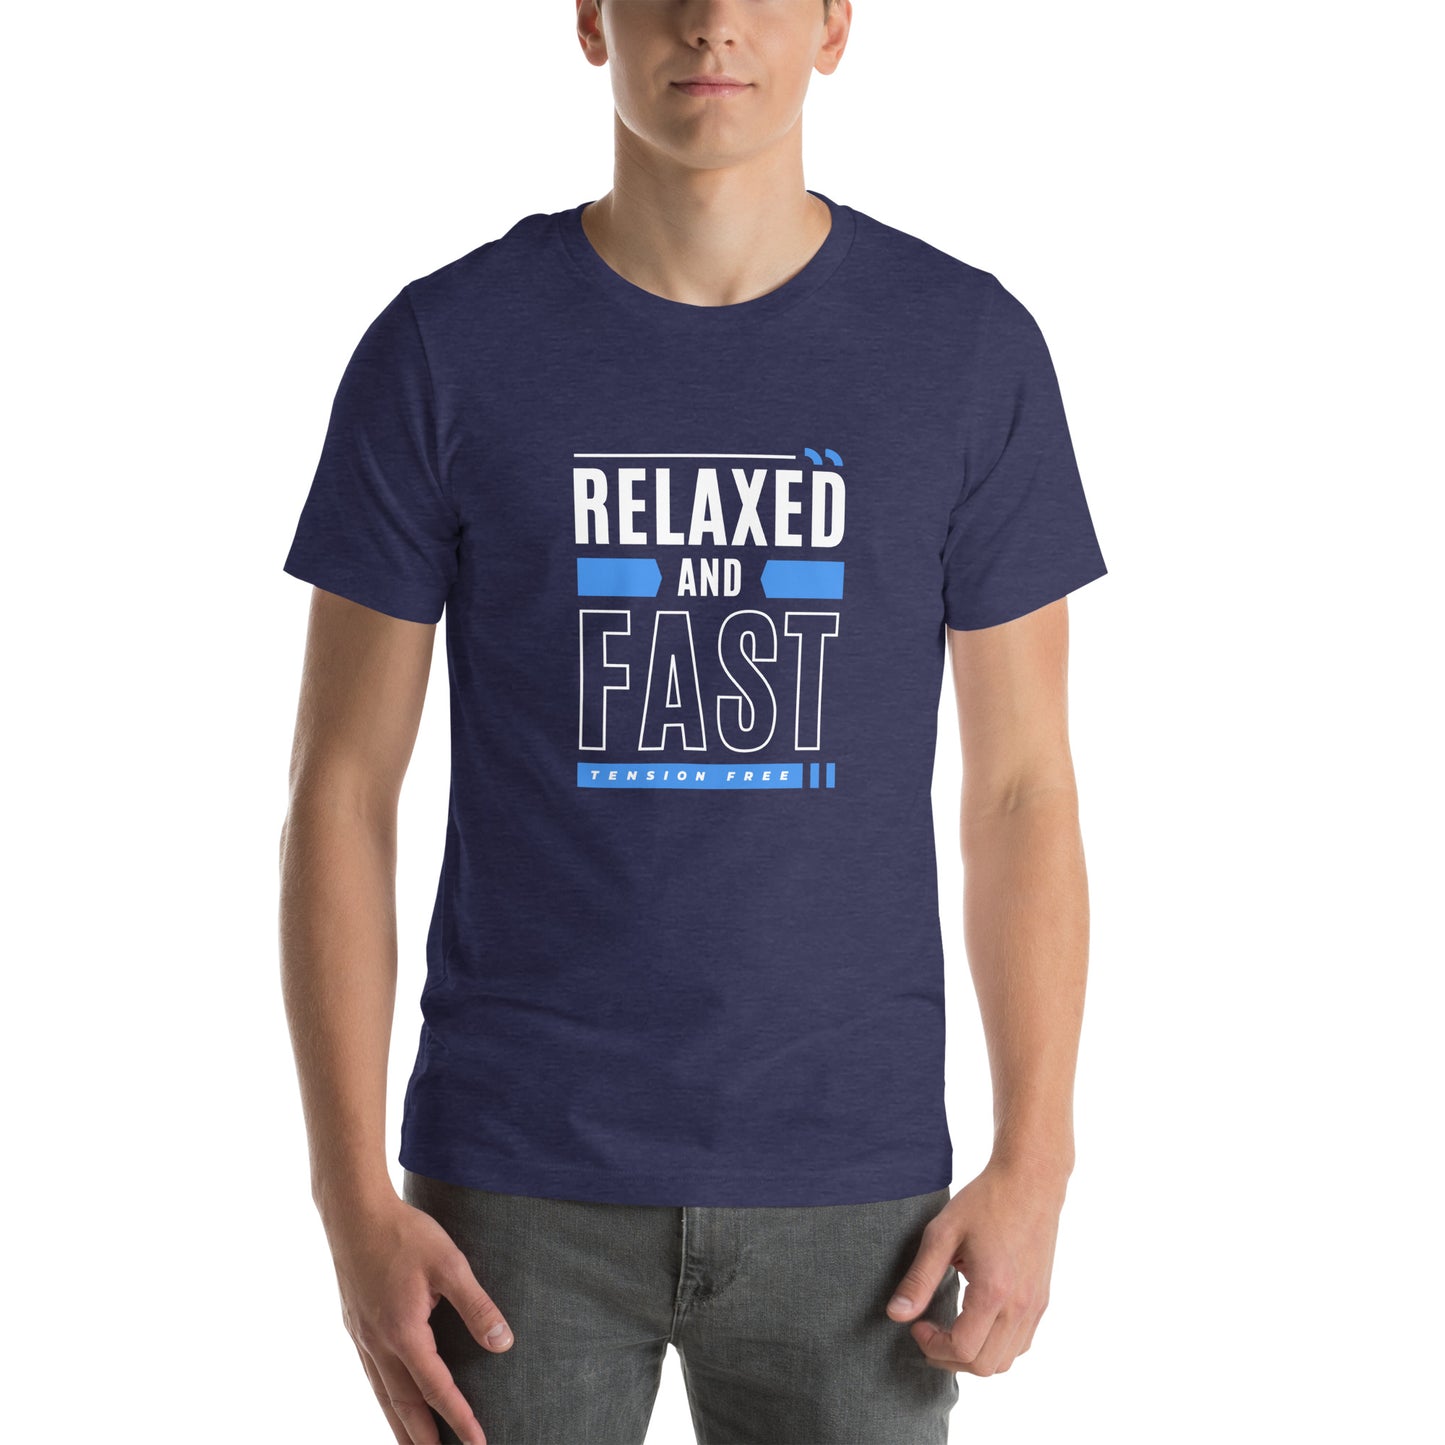 Relaxed and FAST! - Unisex T-Shirt